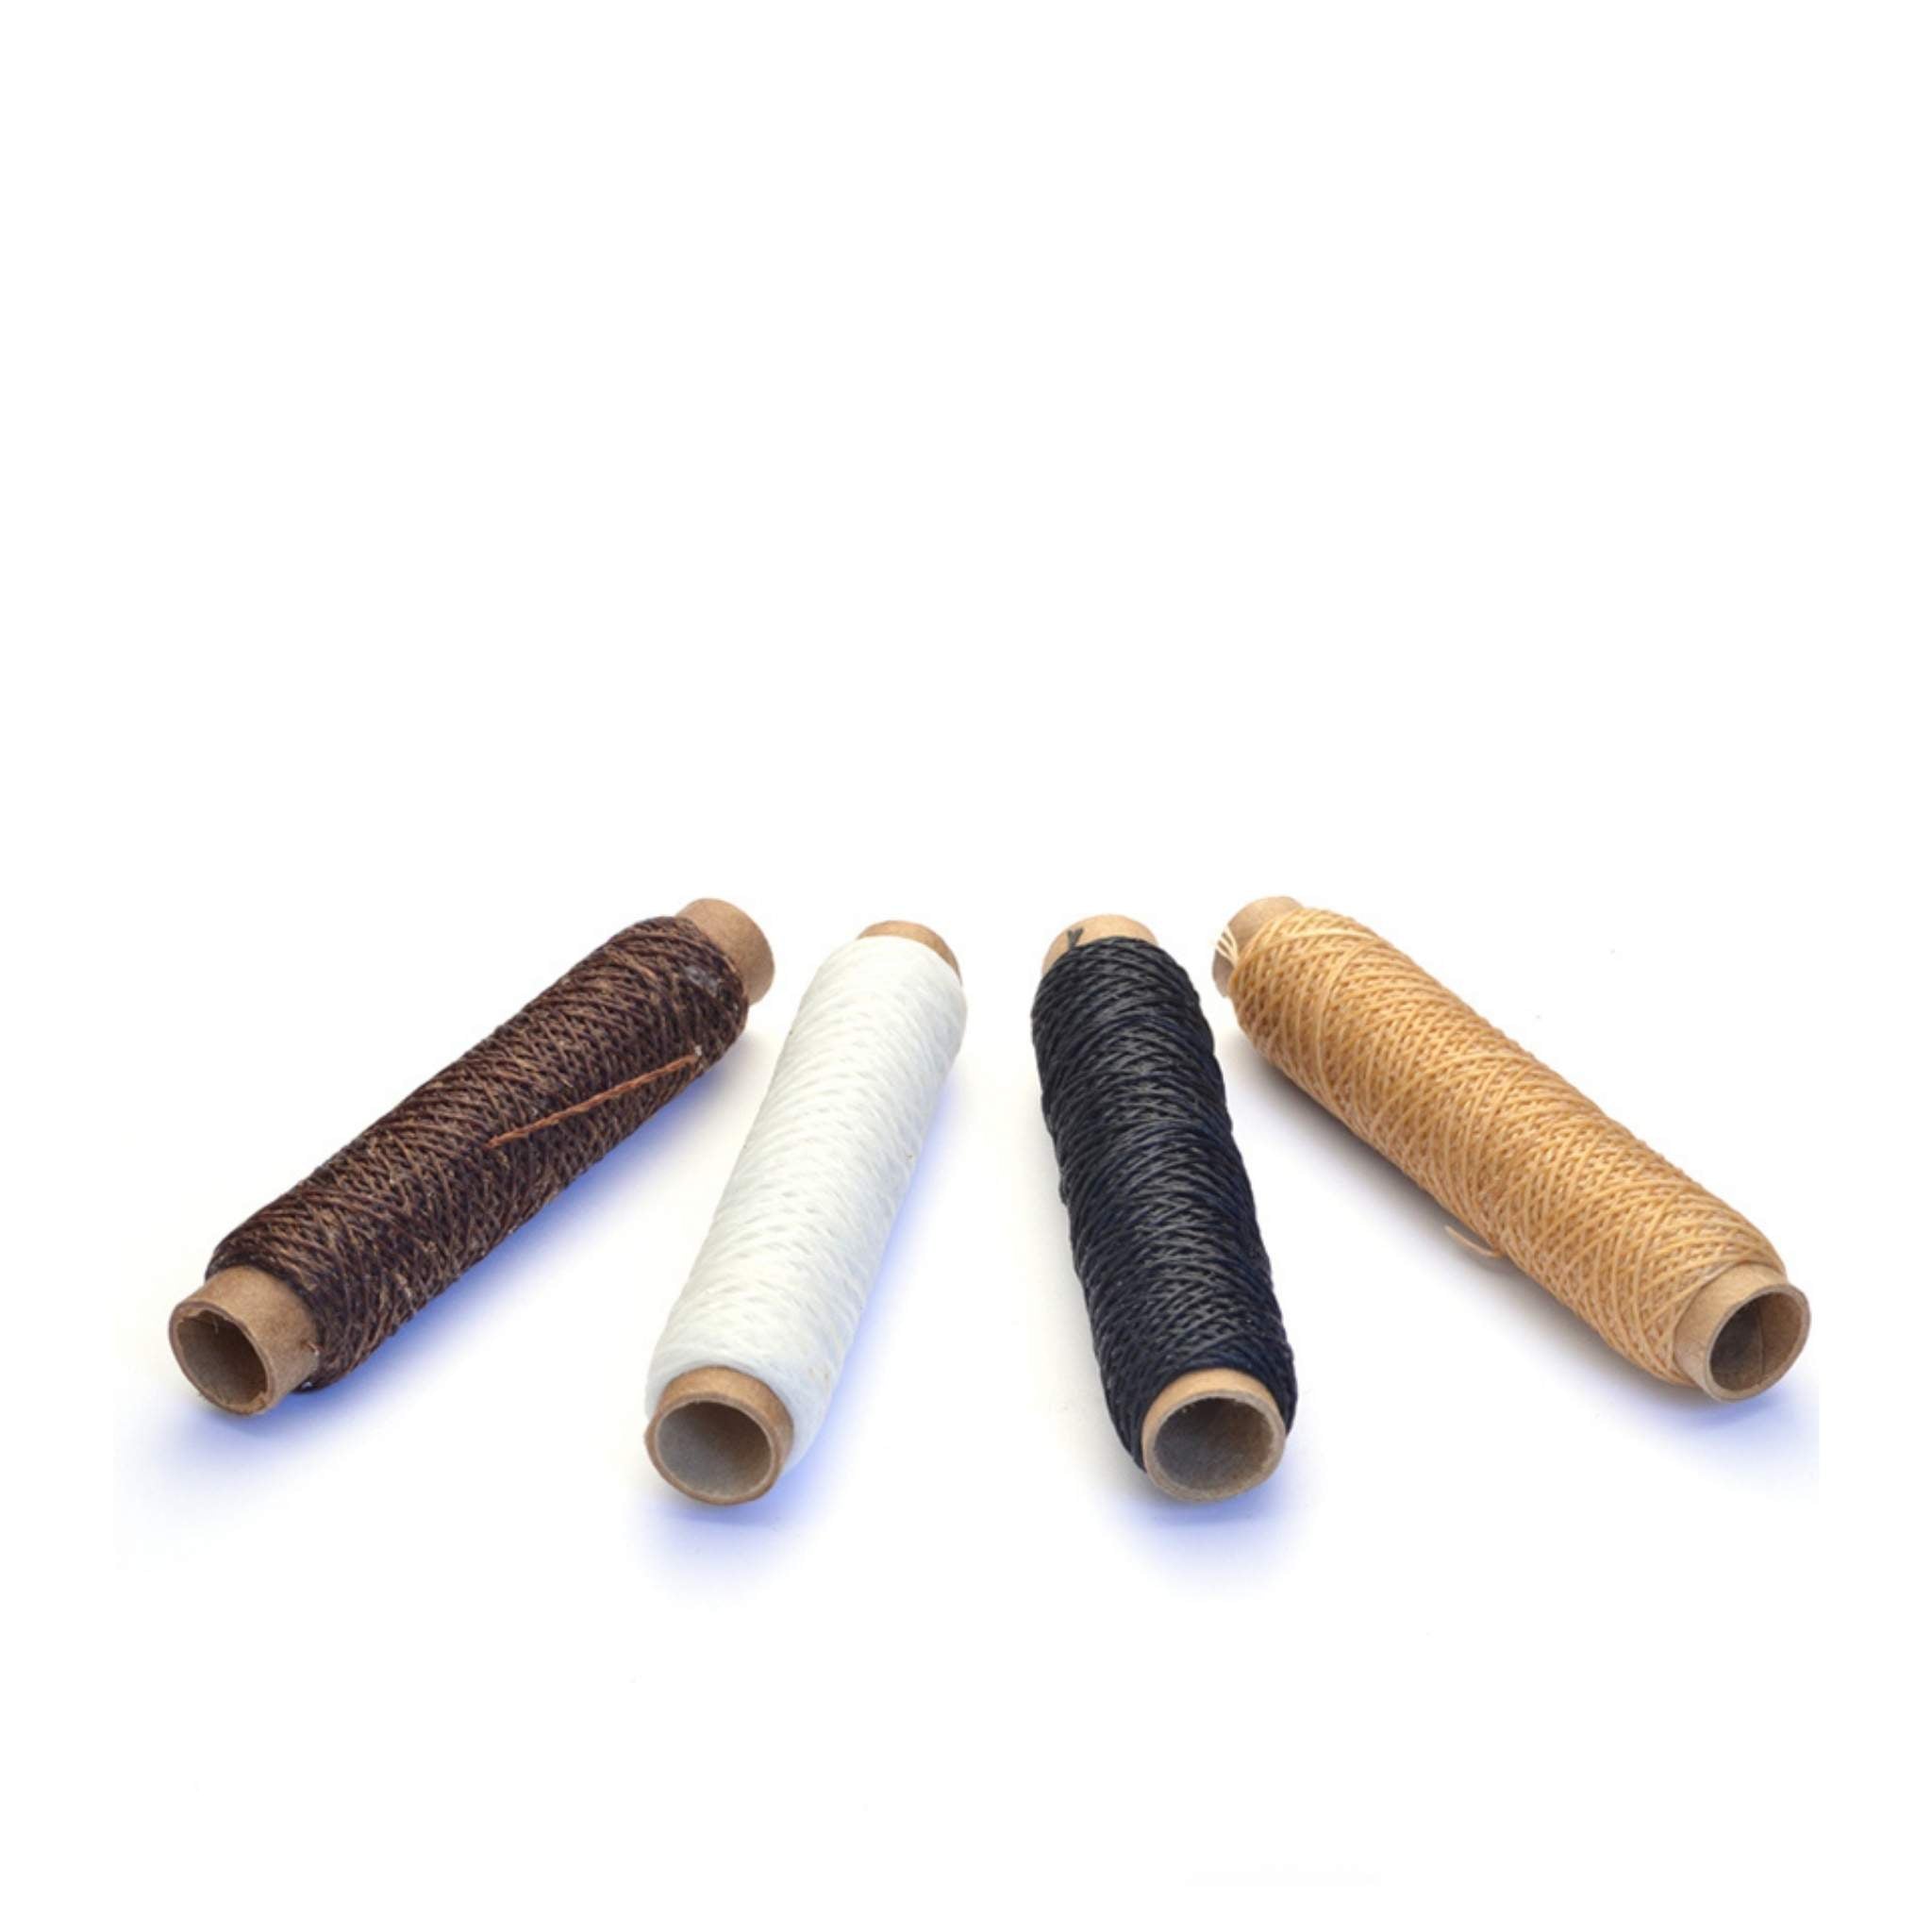 Fine waxed polyester thread for hand stitching and repair leather items